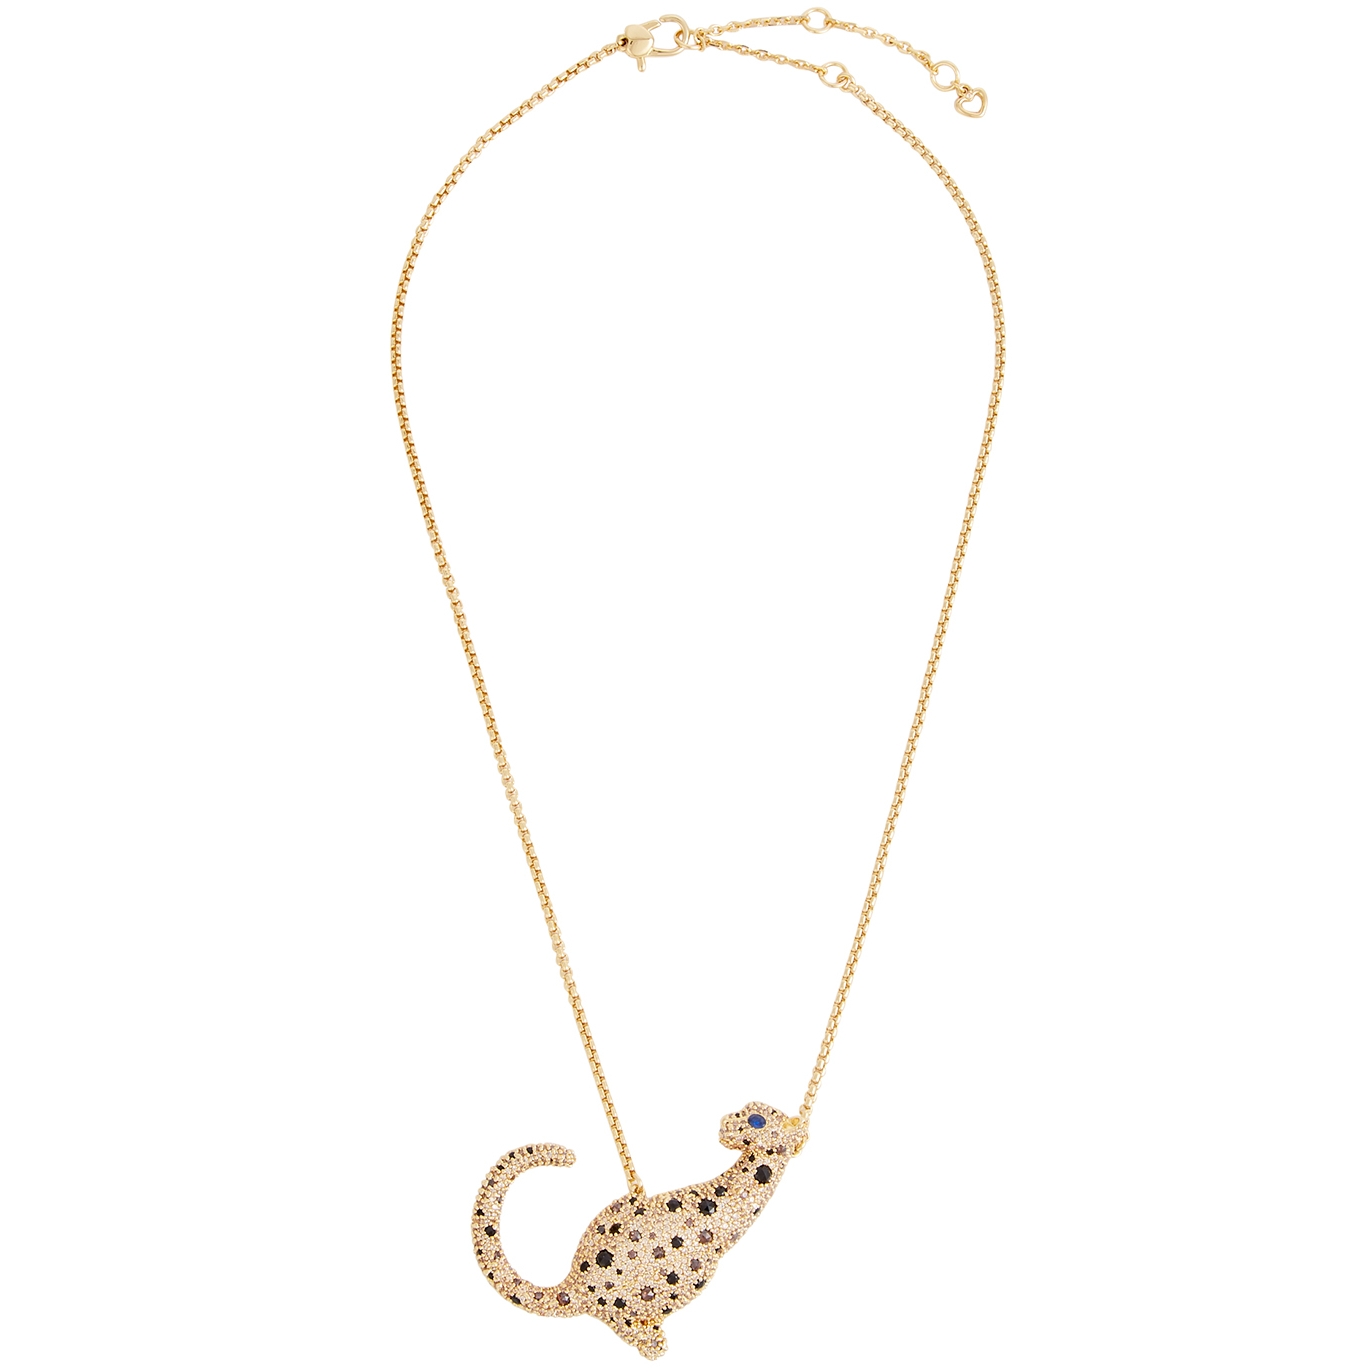 Kate Spade New York Leopard Embellished Gold-tone Necklace - Multicoloured - One Size